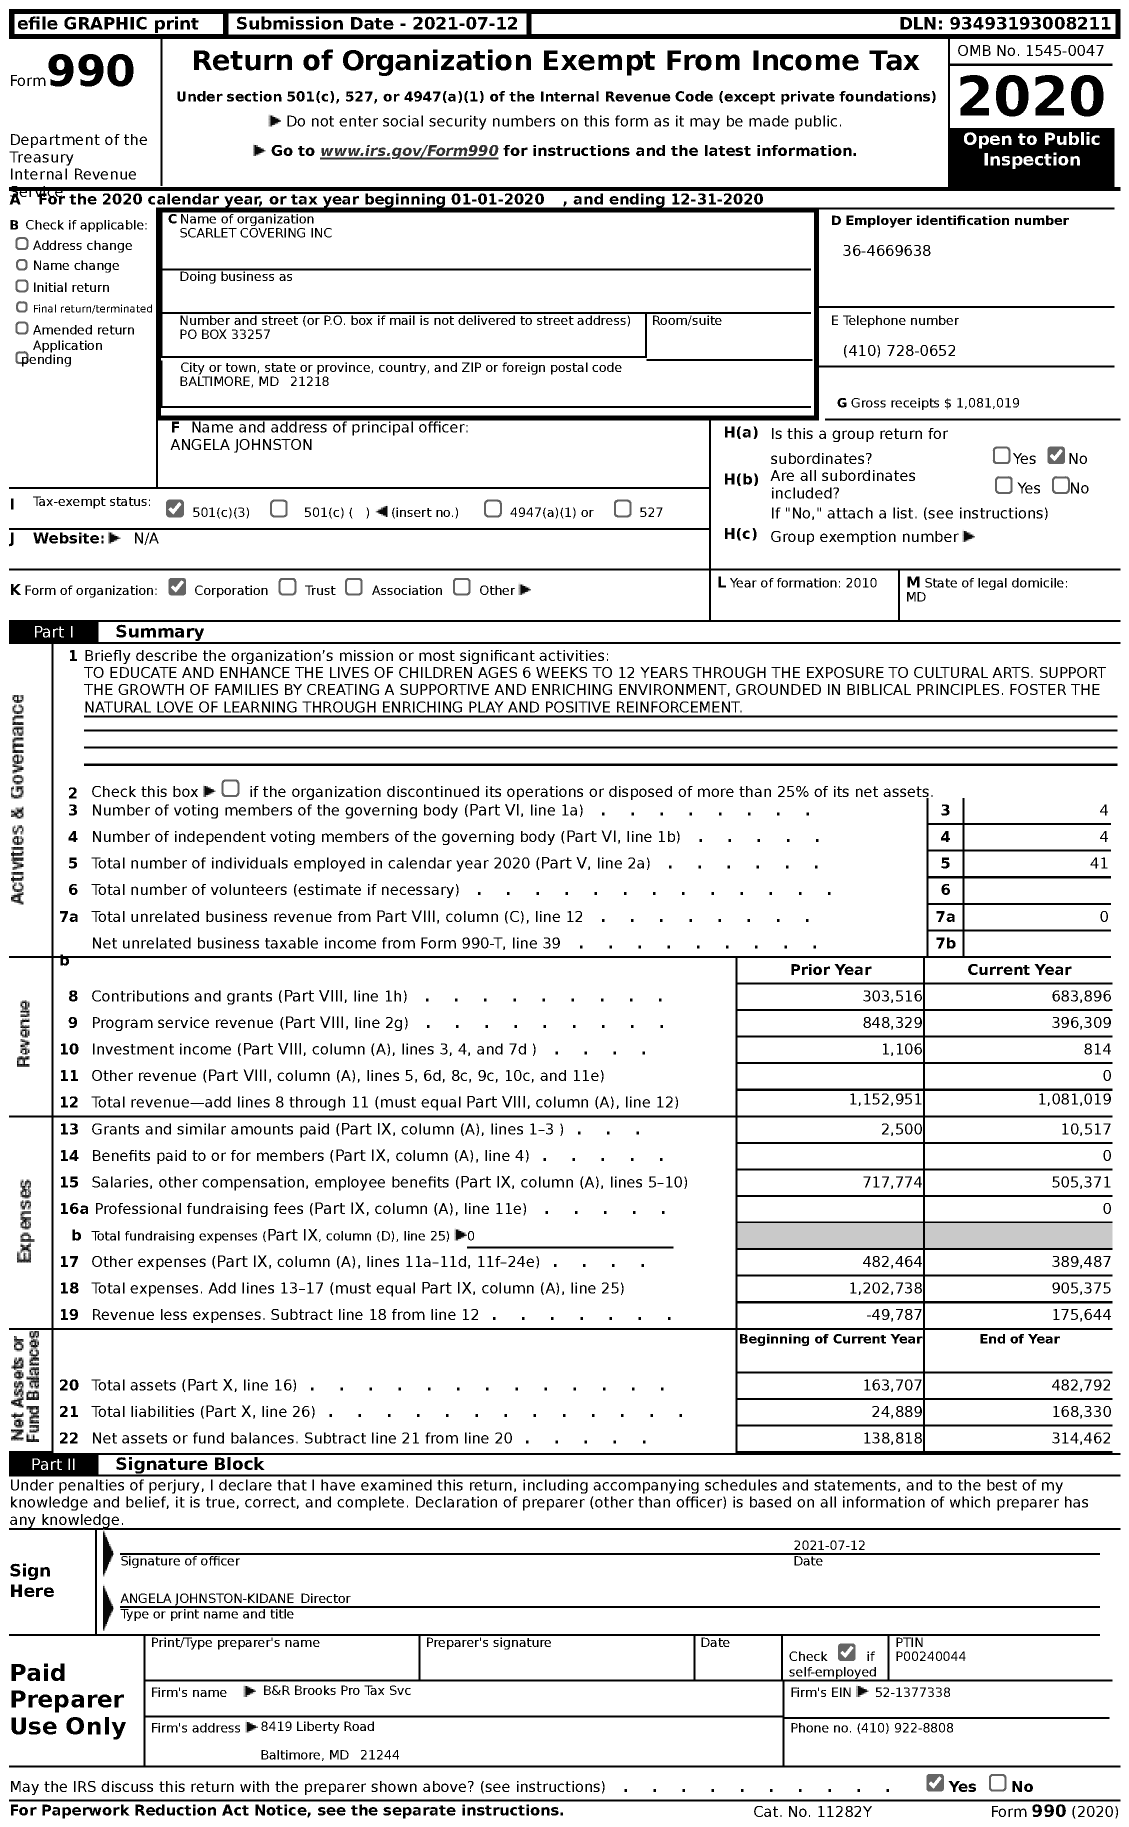 Image of first page of 2020 Form 990 for Scarlet Covering